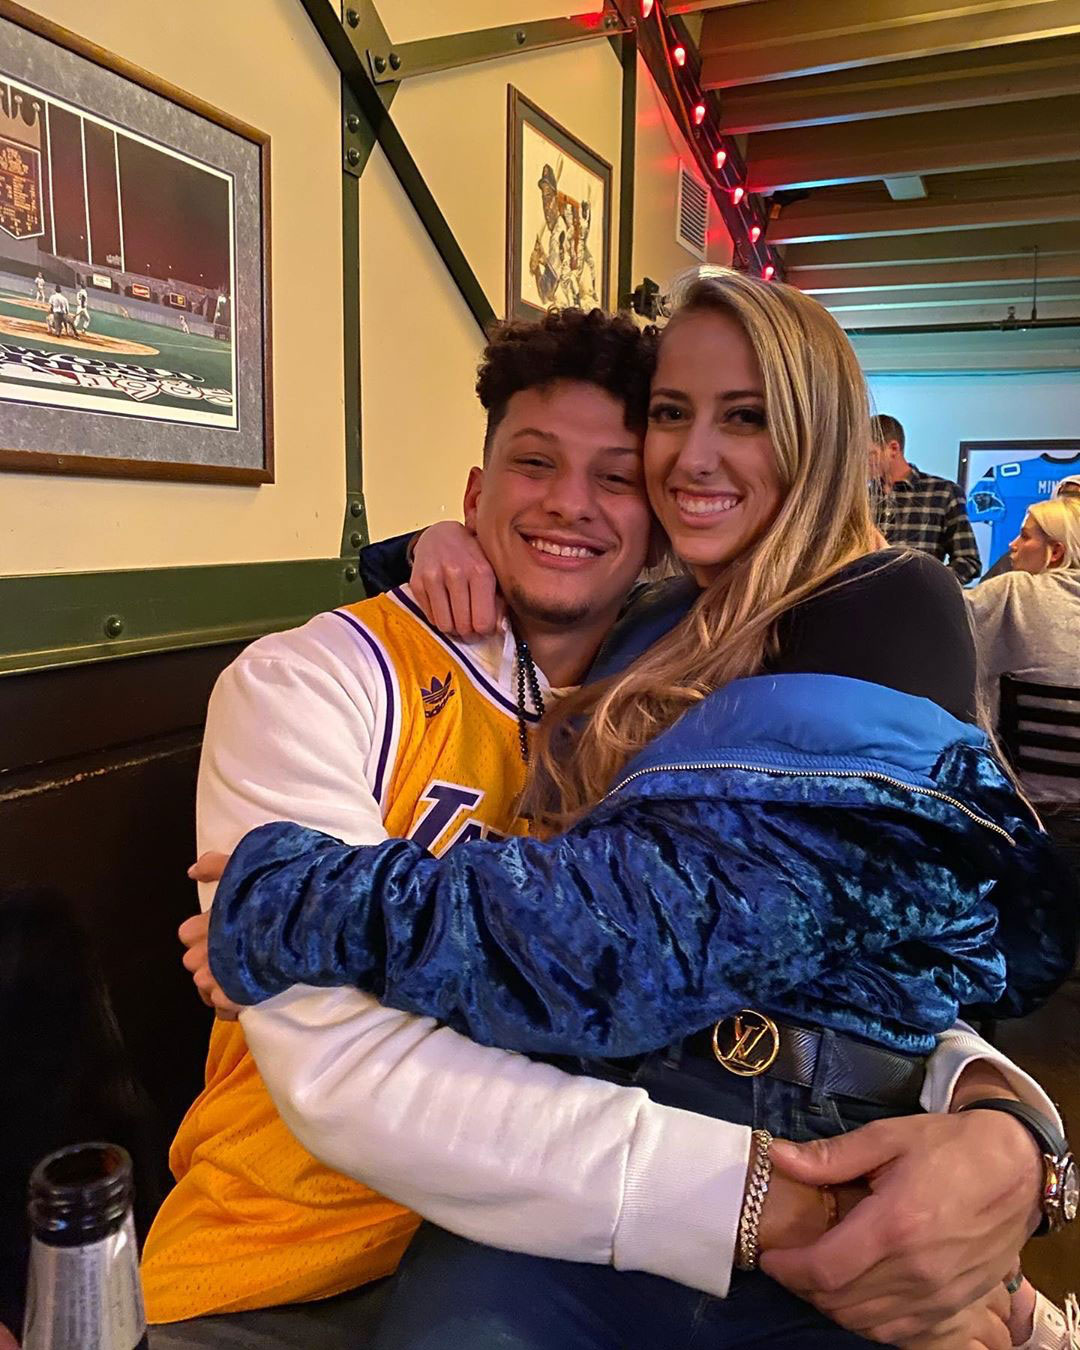 Patrick Mahomes and Brittany Matthews Relationship Timeline: From